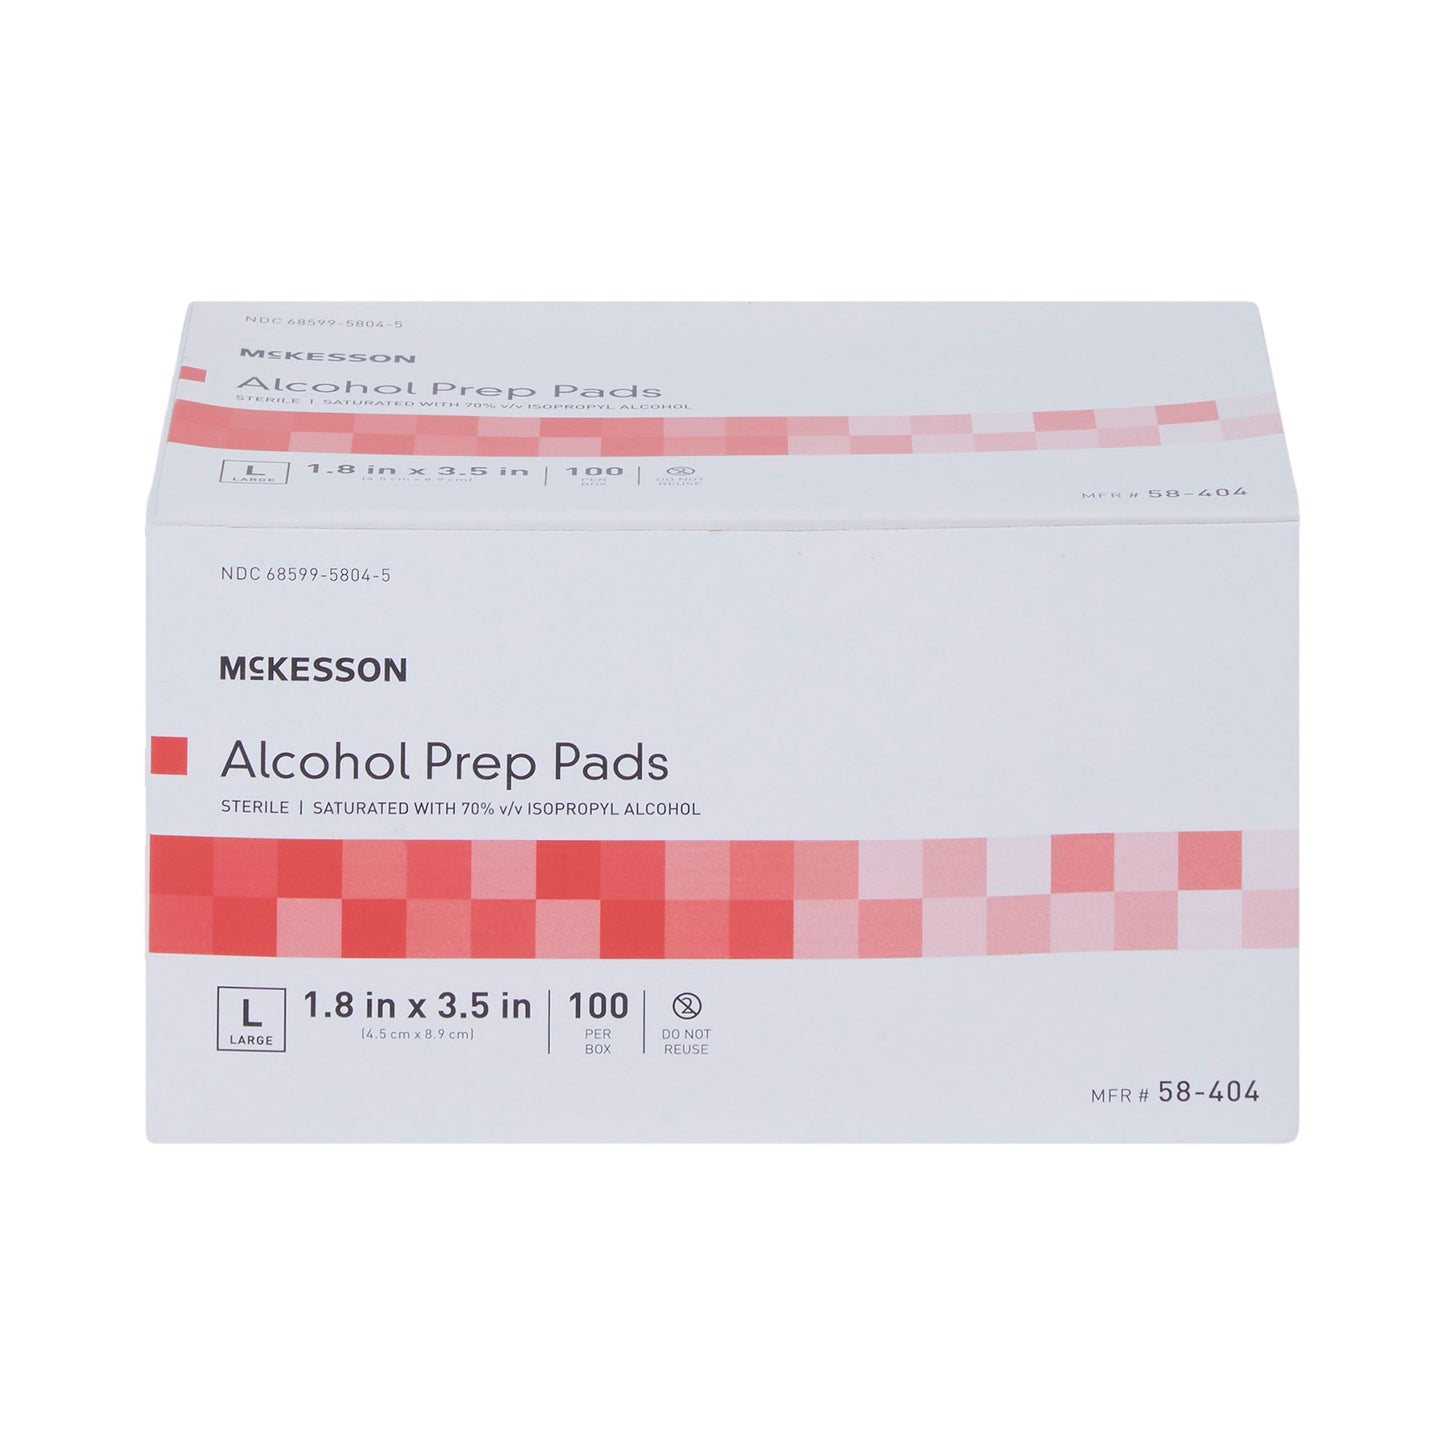 Alcohol Prep Pad McKesson 70% Strength Isopropyl Alcohol Individual Packet Large Sterile, 1000 ct